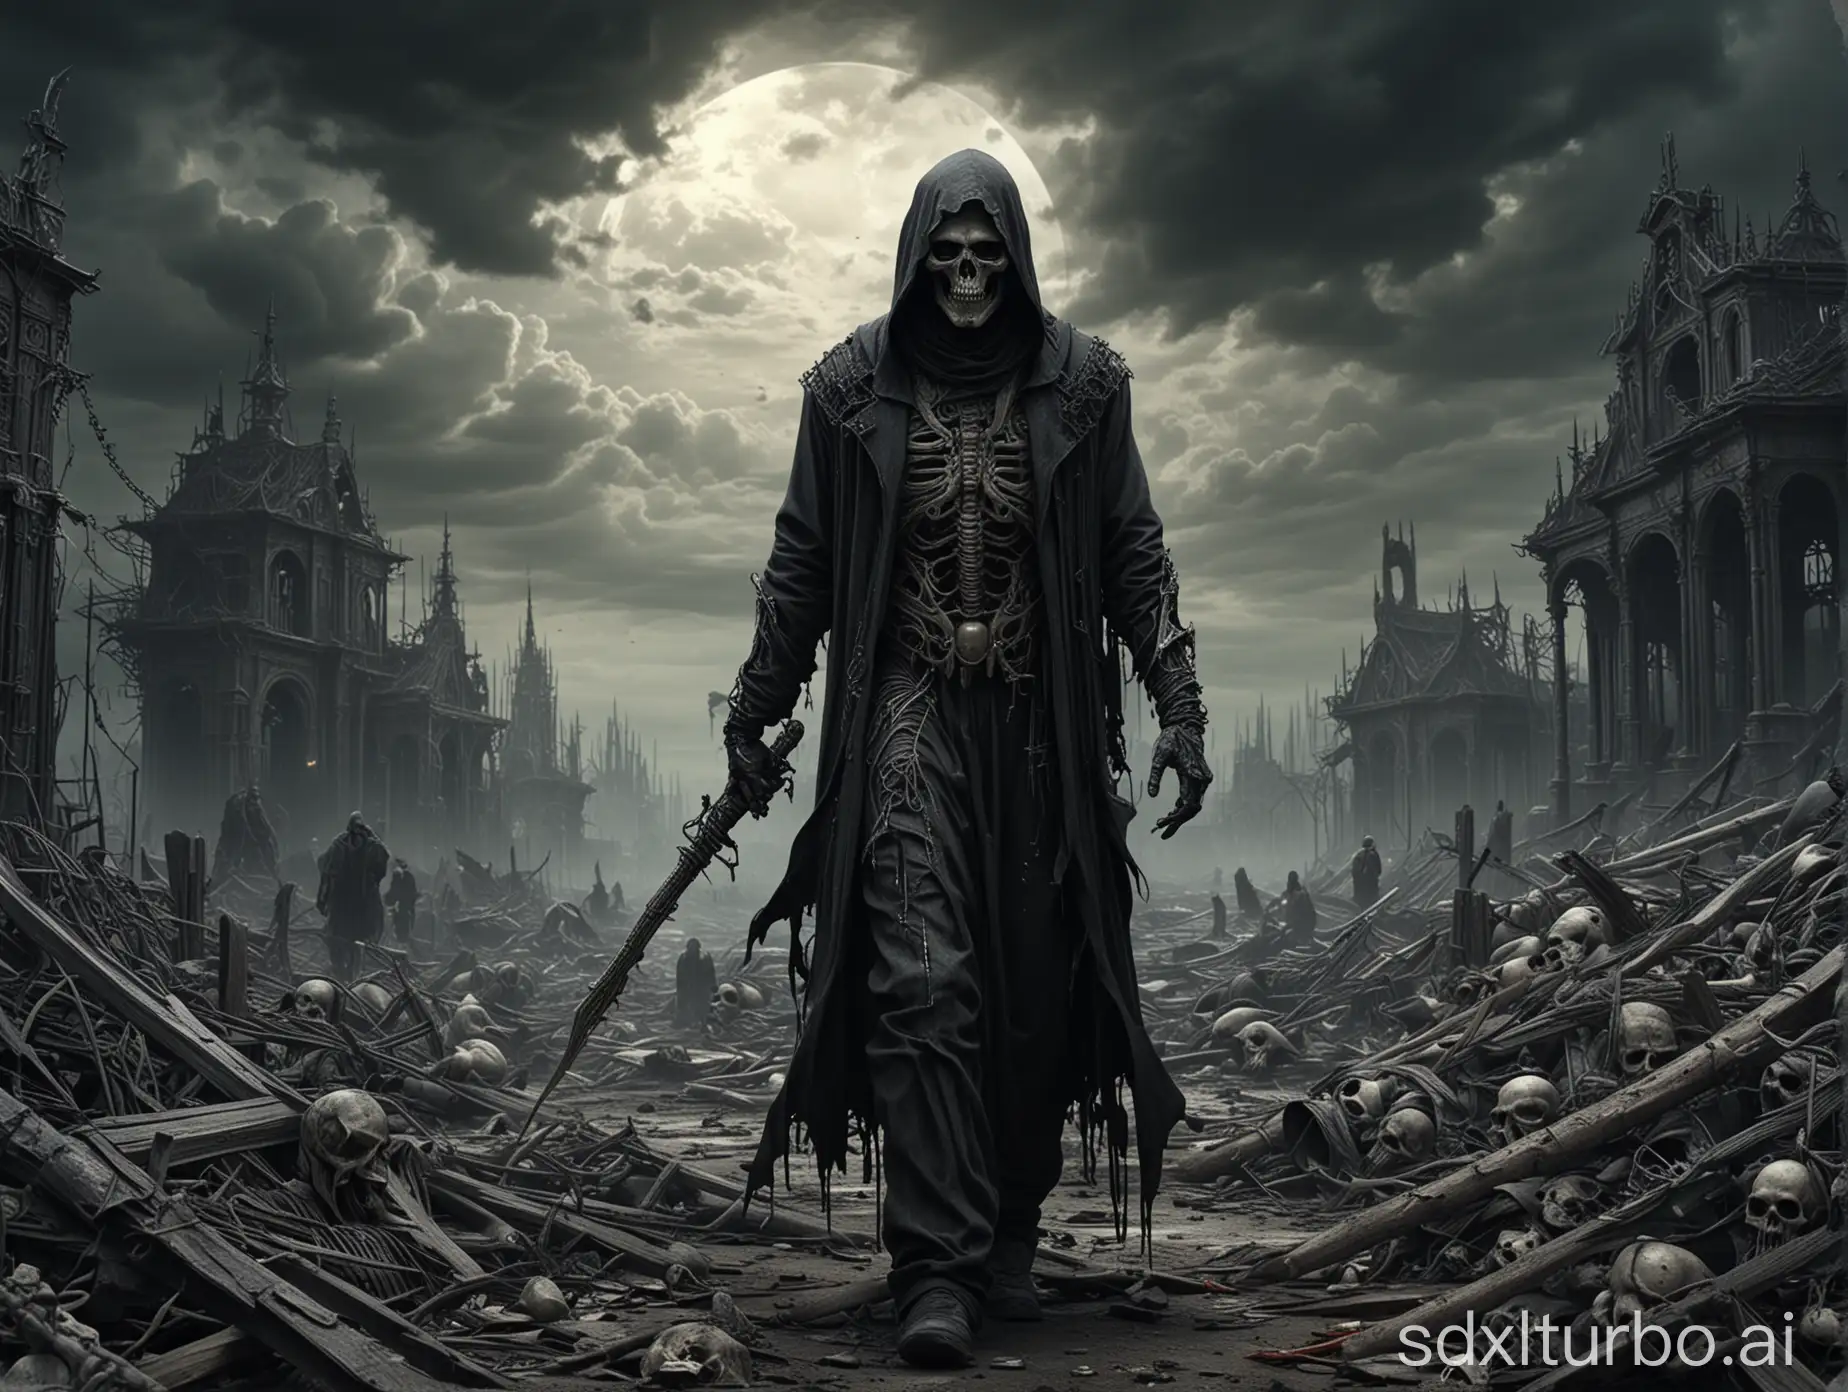 when the Grim Reaper comes to get you, apocalyptic, dystopian, filigree, very detailed, ultra-high resolution